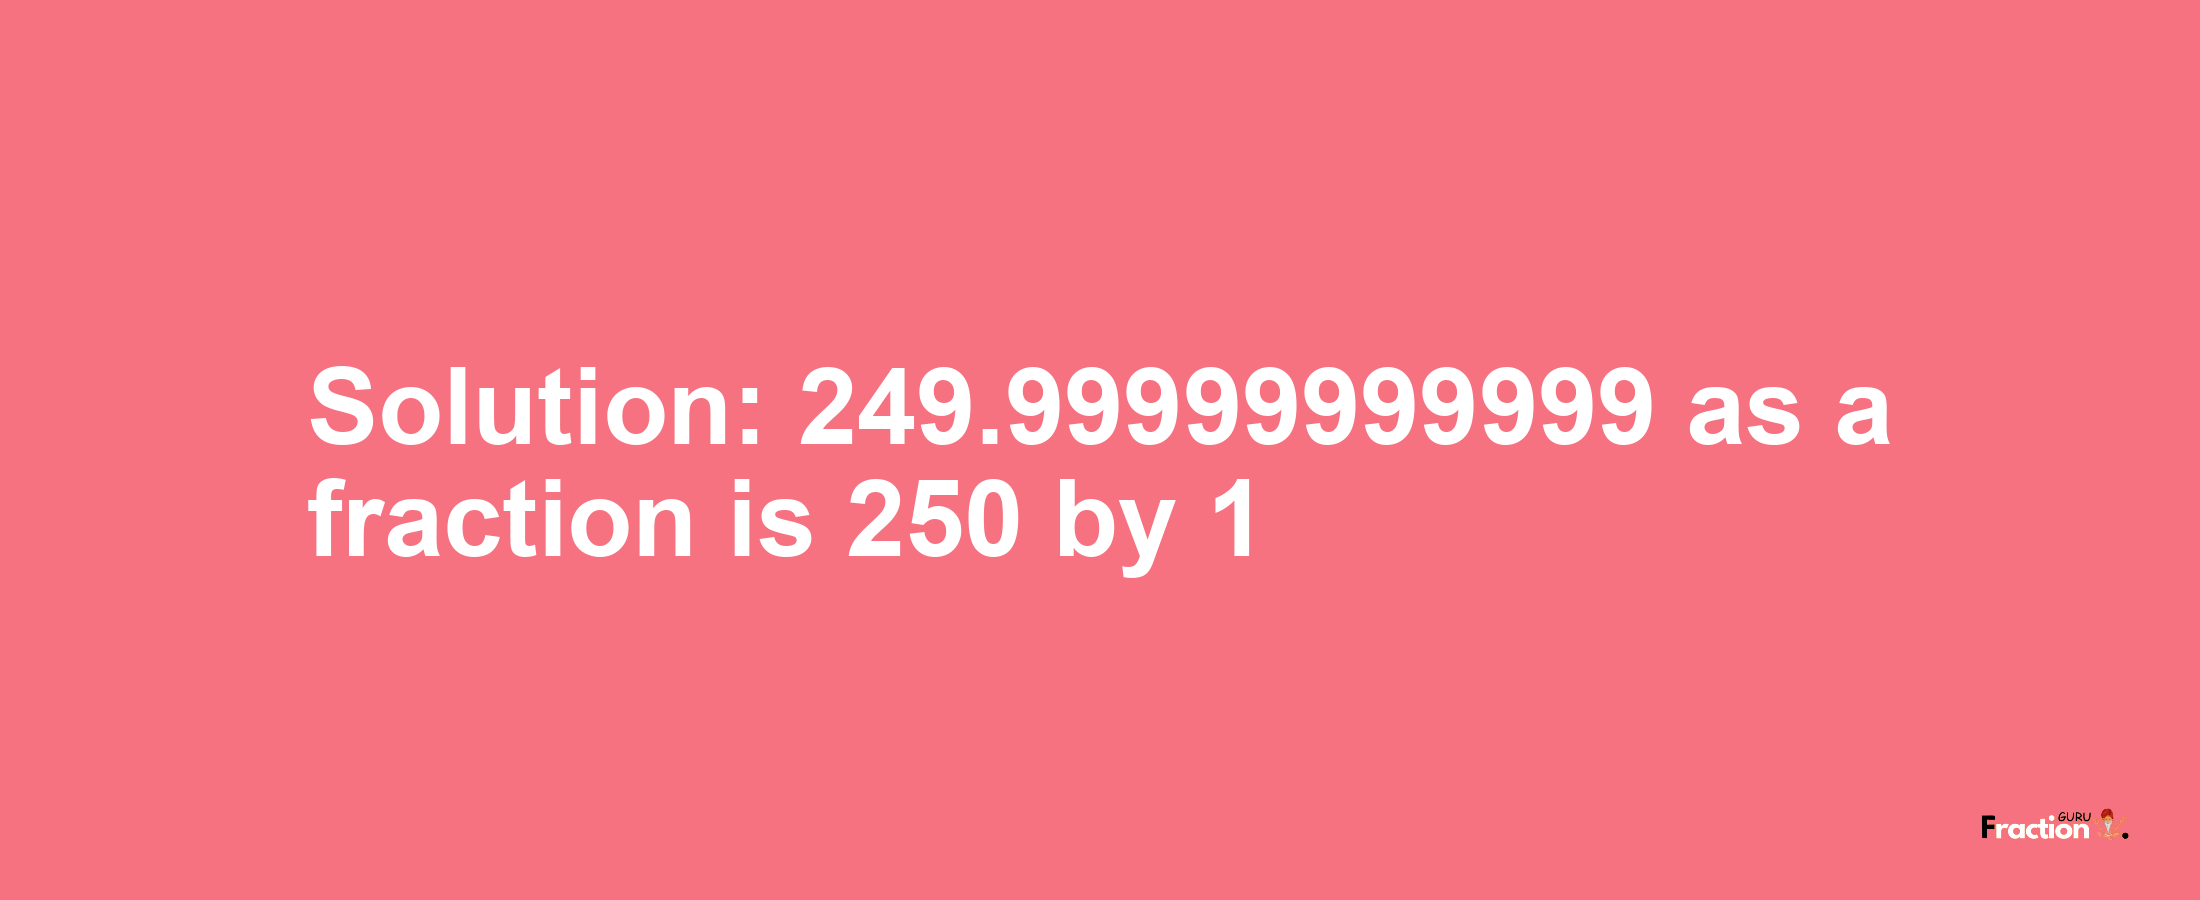 Solution:249.99999999999 as a fraction is 250/1